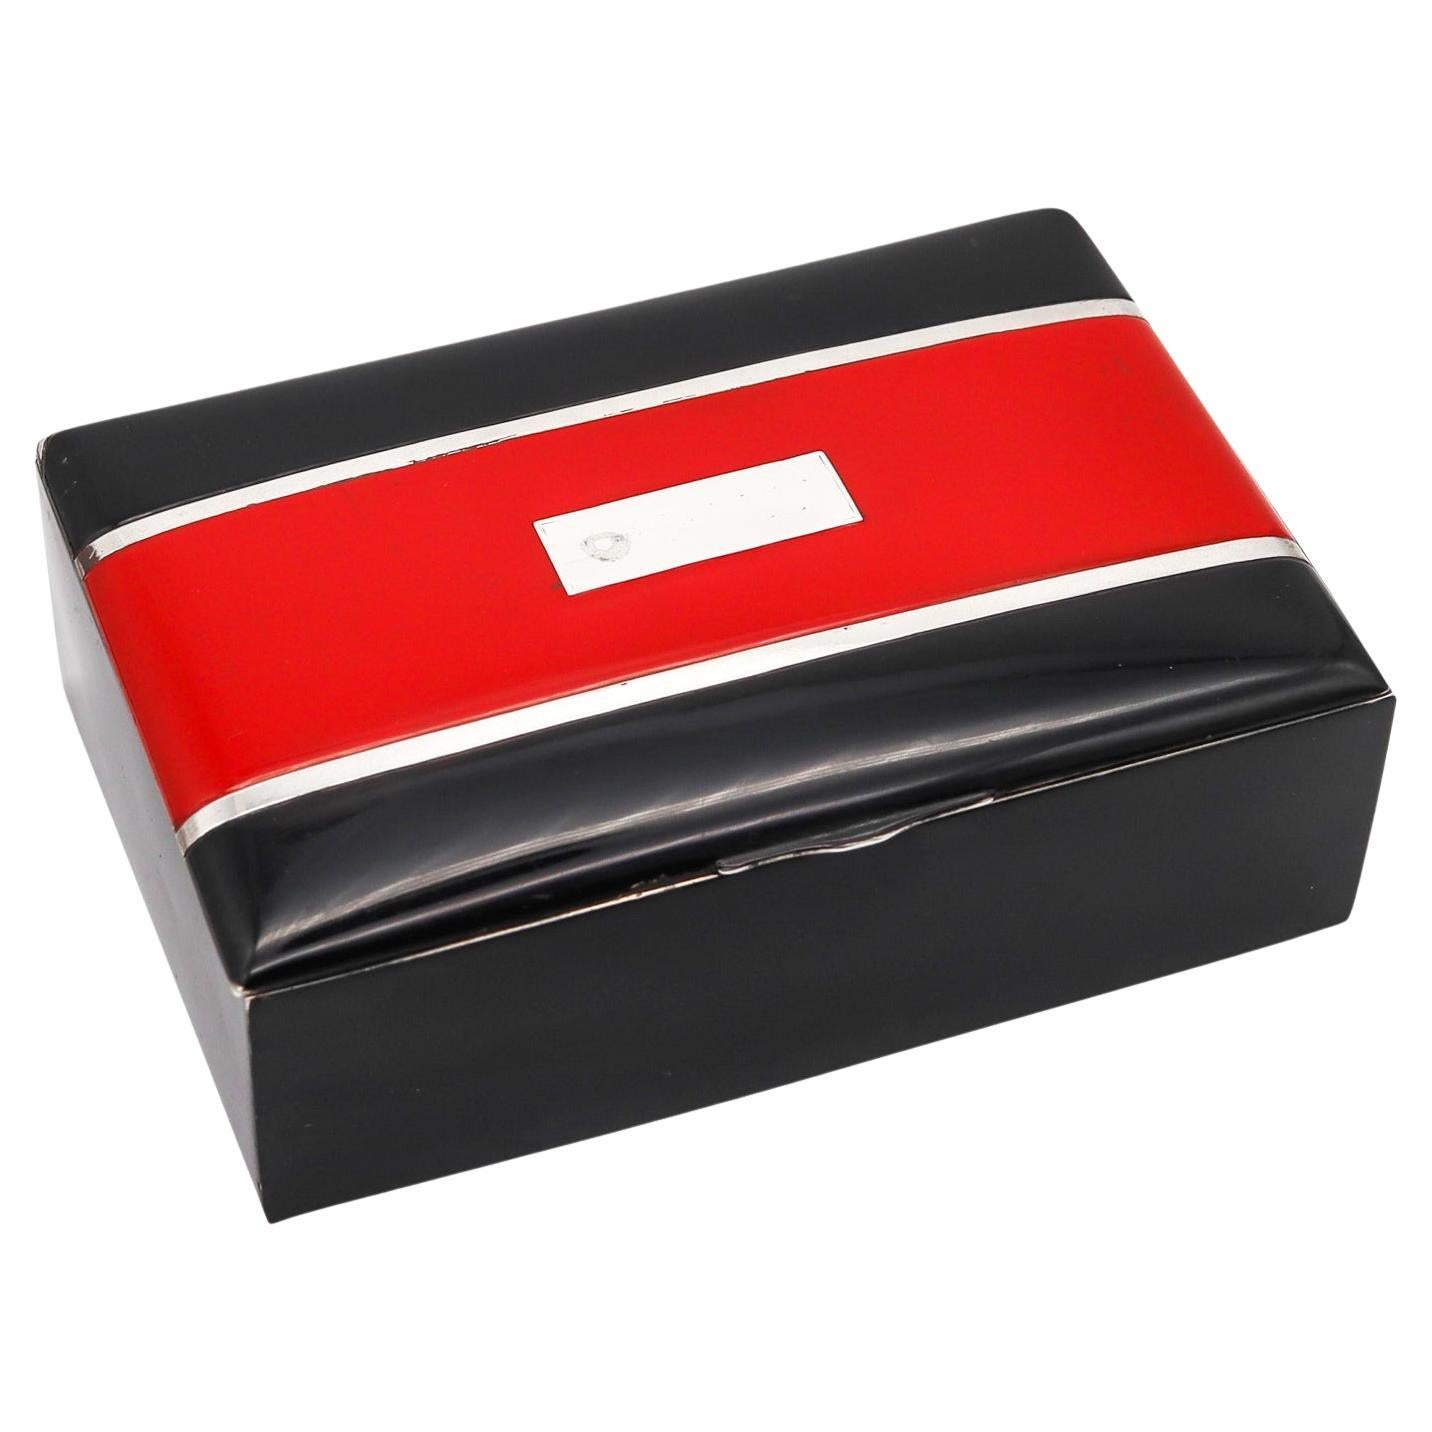 Charles Thomae 1925 Art Deco Box with Red and Black Lacquer in Sterling Silver For Sale